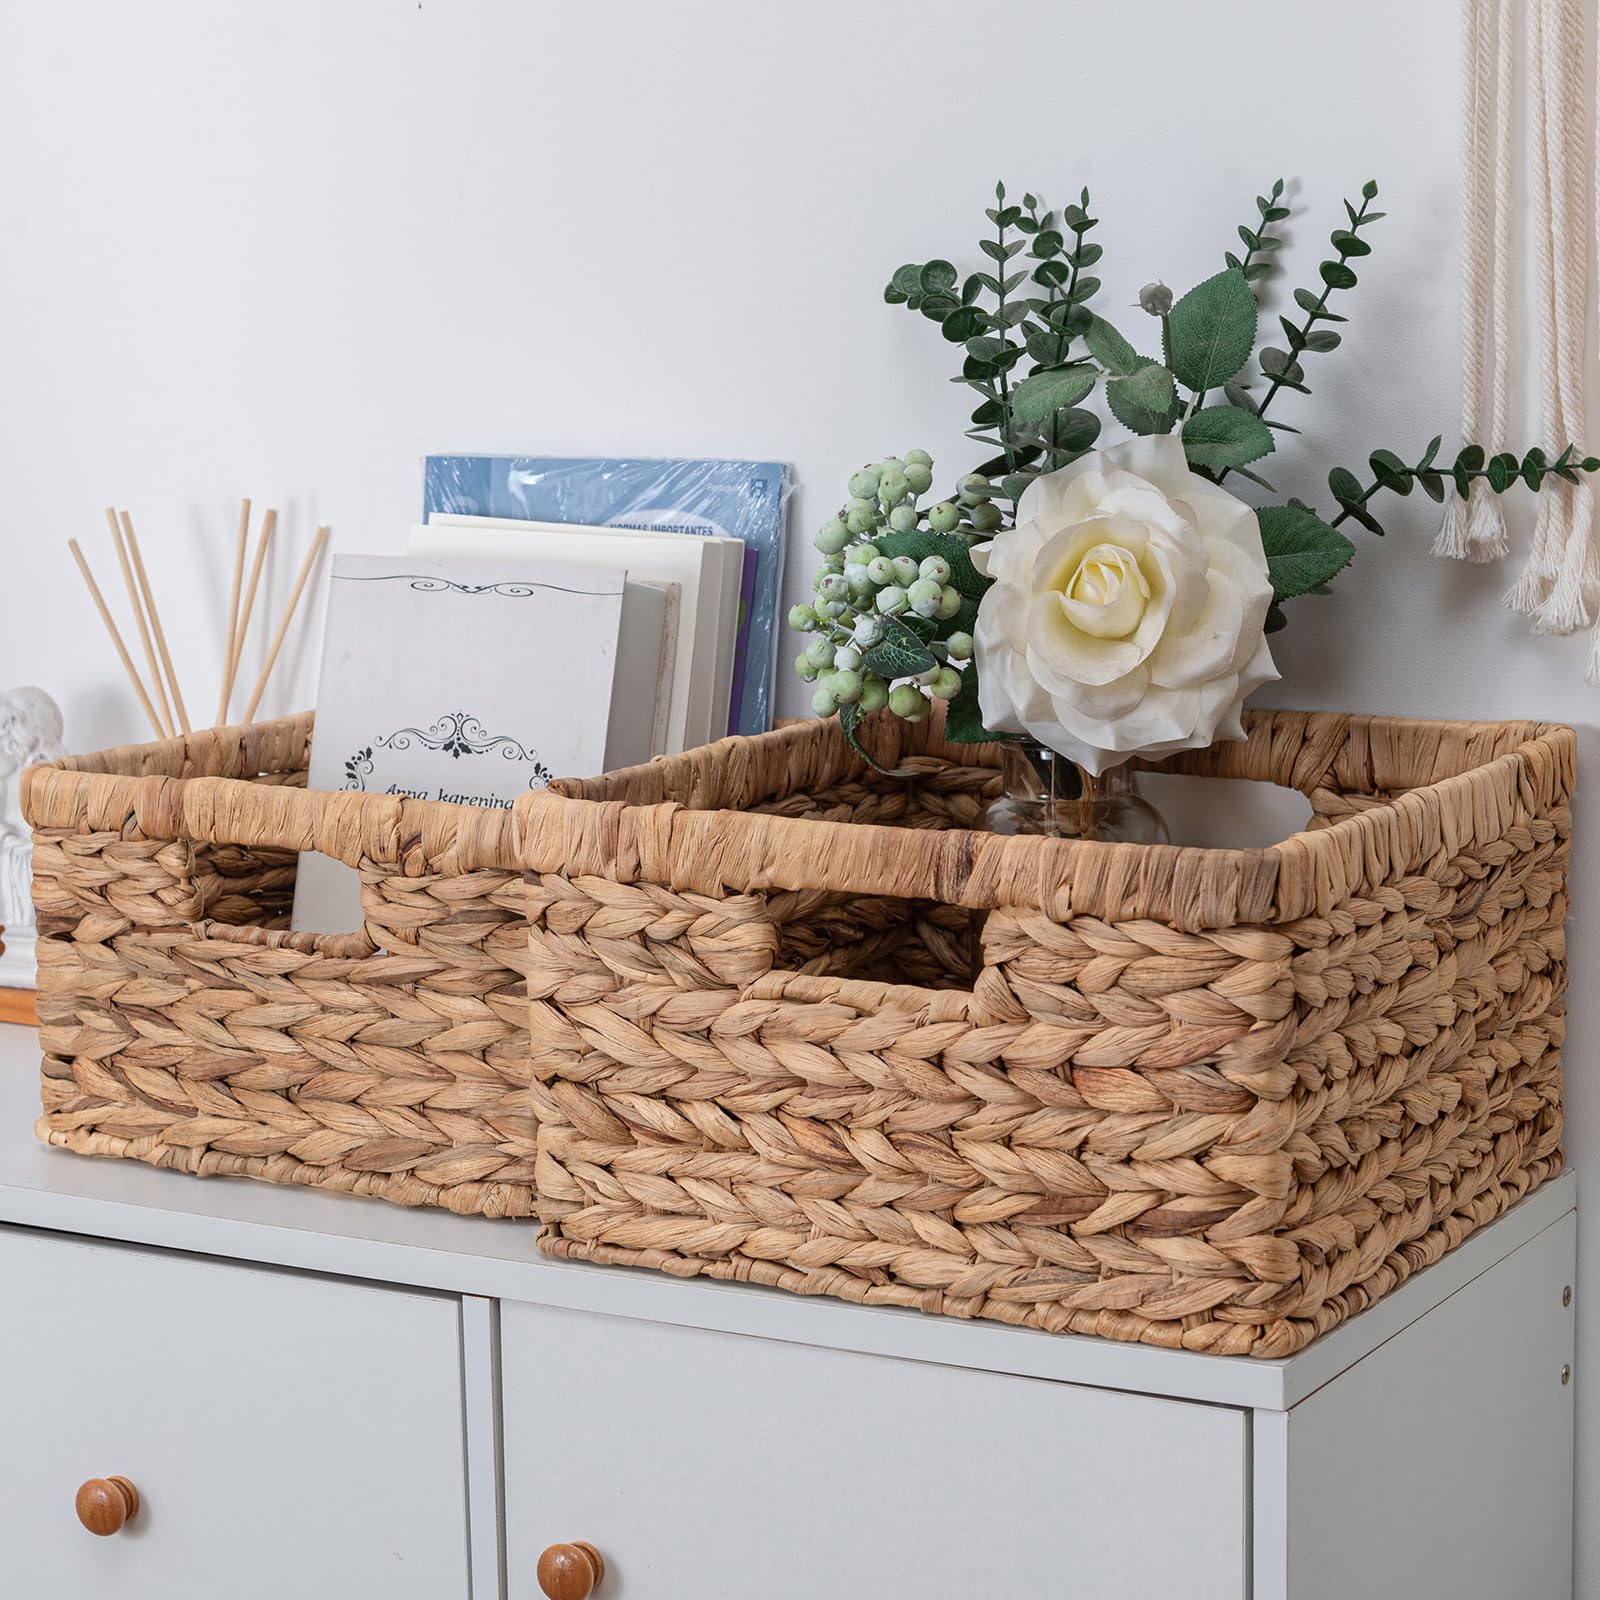 OEHID Wicker Baskets for Storage Water Hyacinth Storage Baskets Wicker Storage Basket, Large Wicker Basket Wicker Baskets for Shelves Pantry Baskets, Rectangular Storage Baskets with Handles, 2 Pack